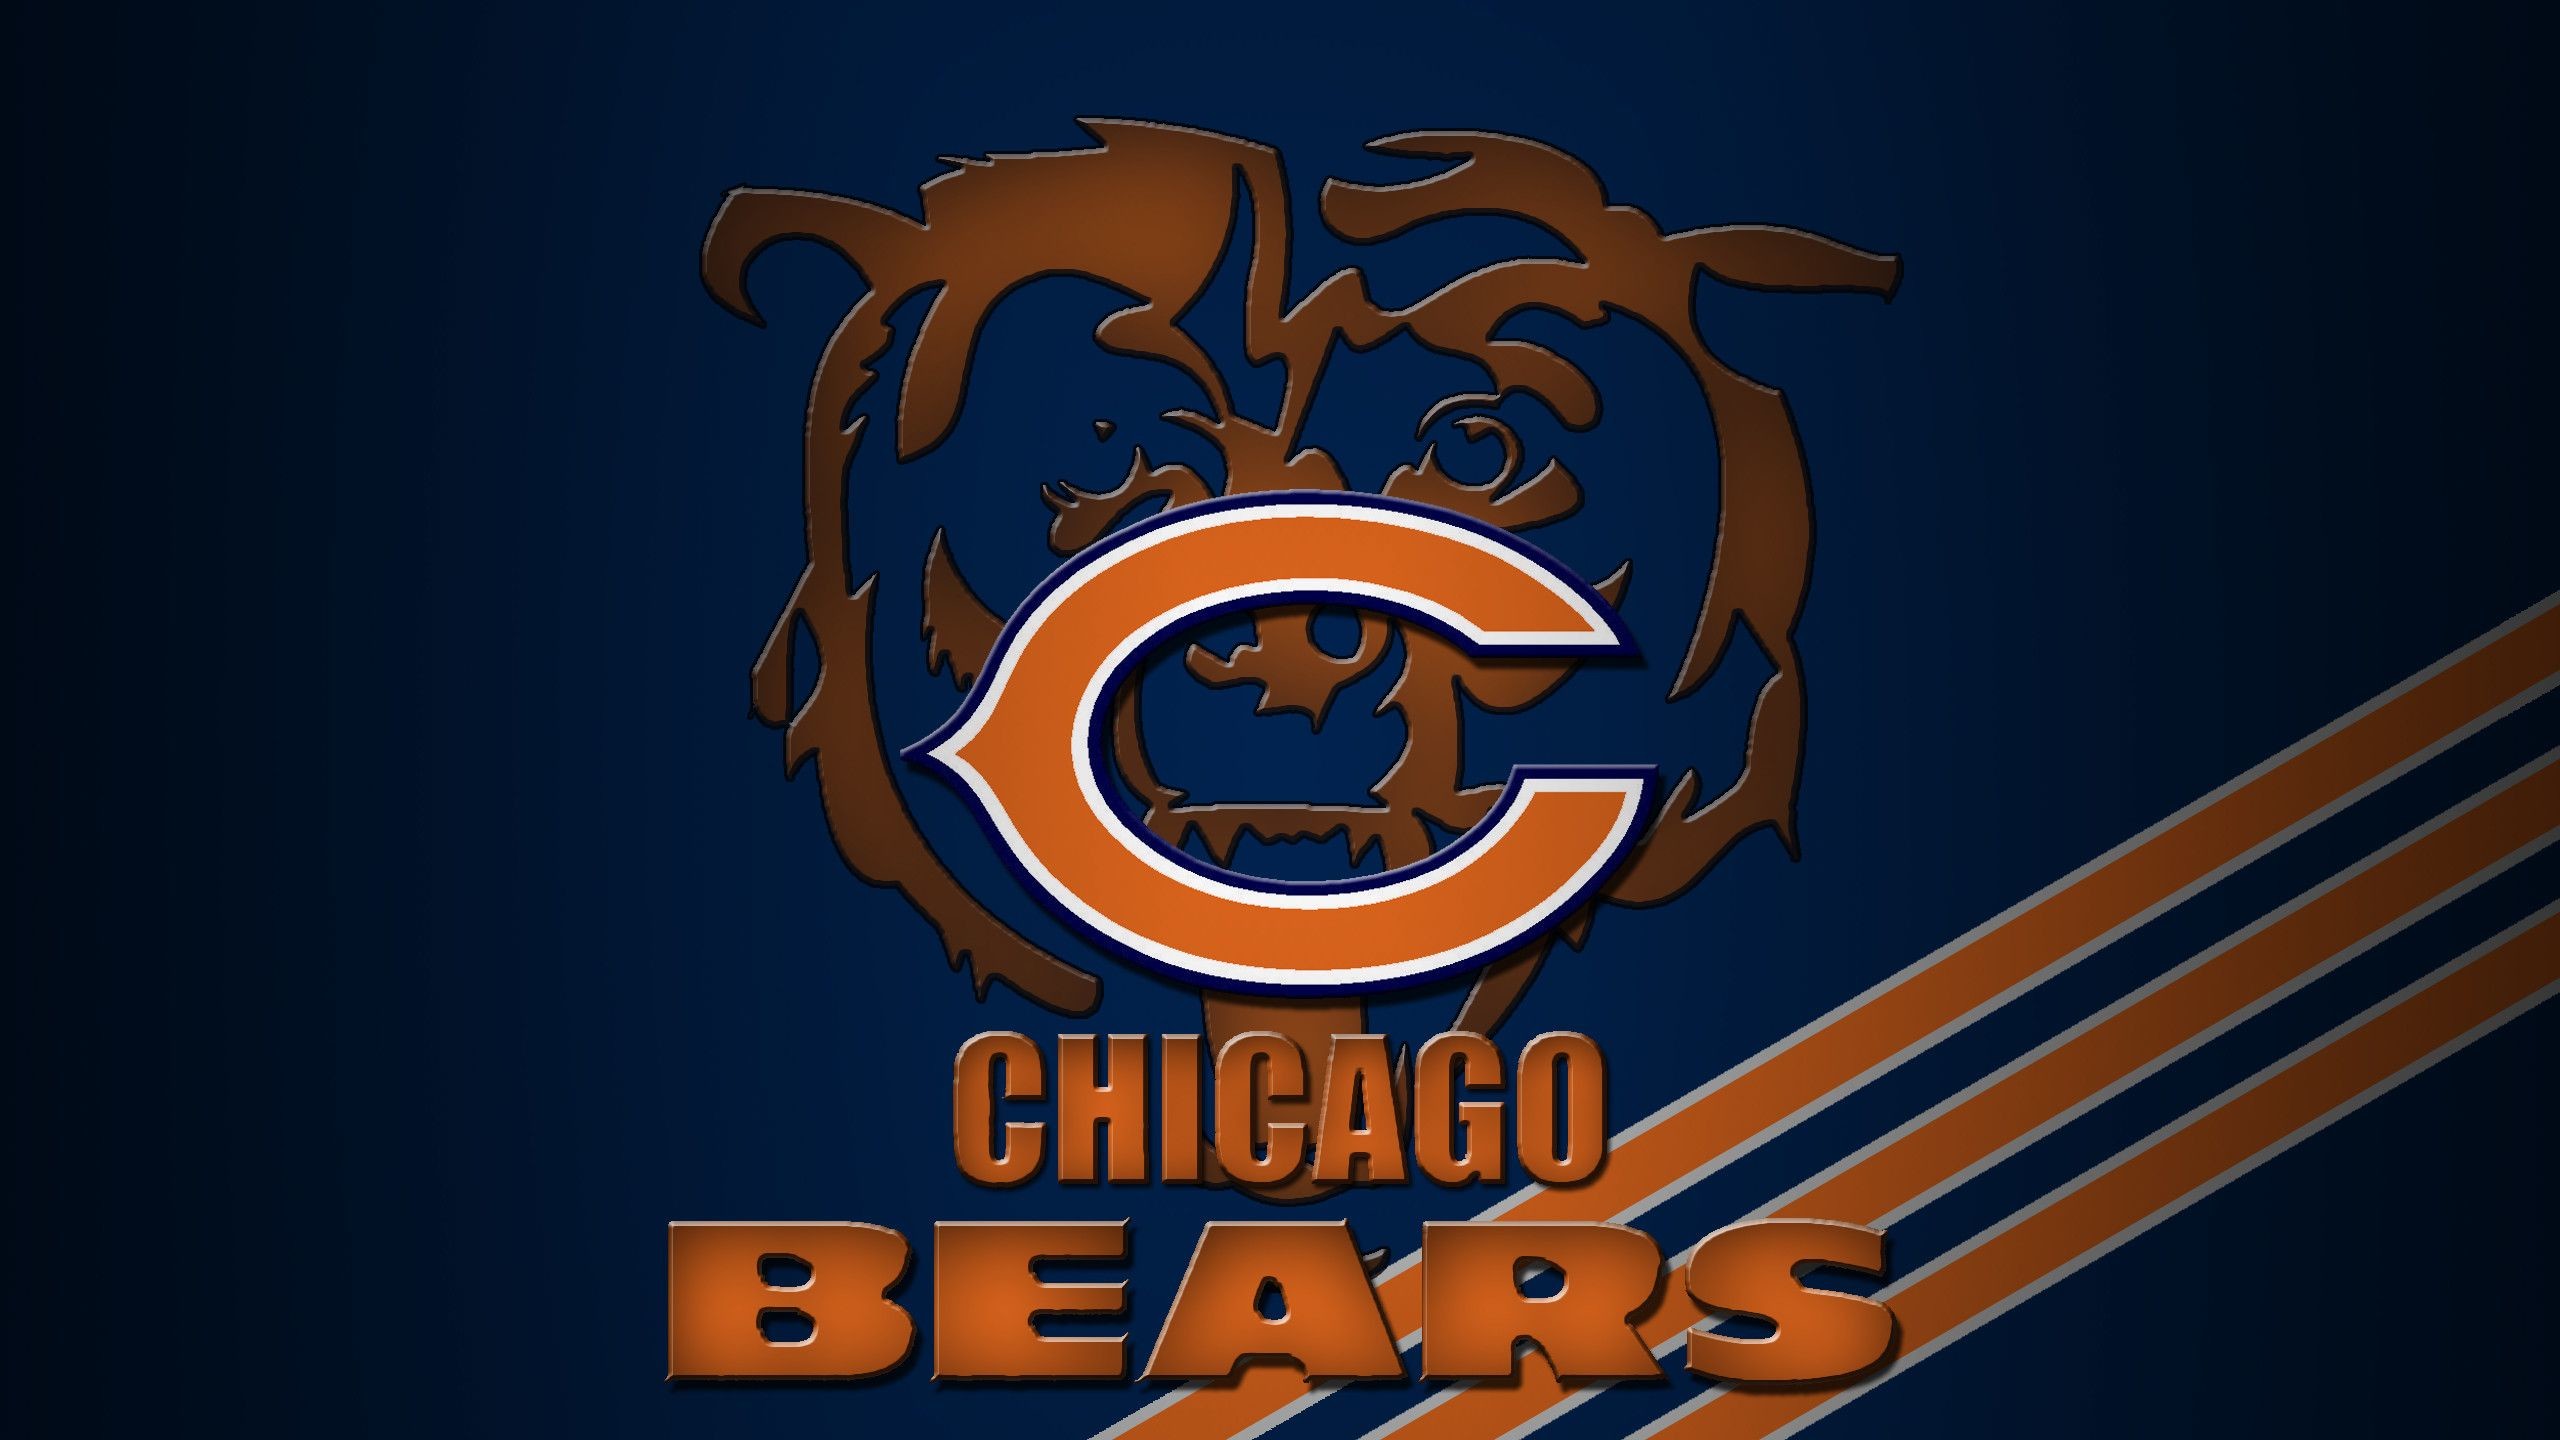 2560x1440 Chicago Bears Wallpaper 2018 (60+ images)